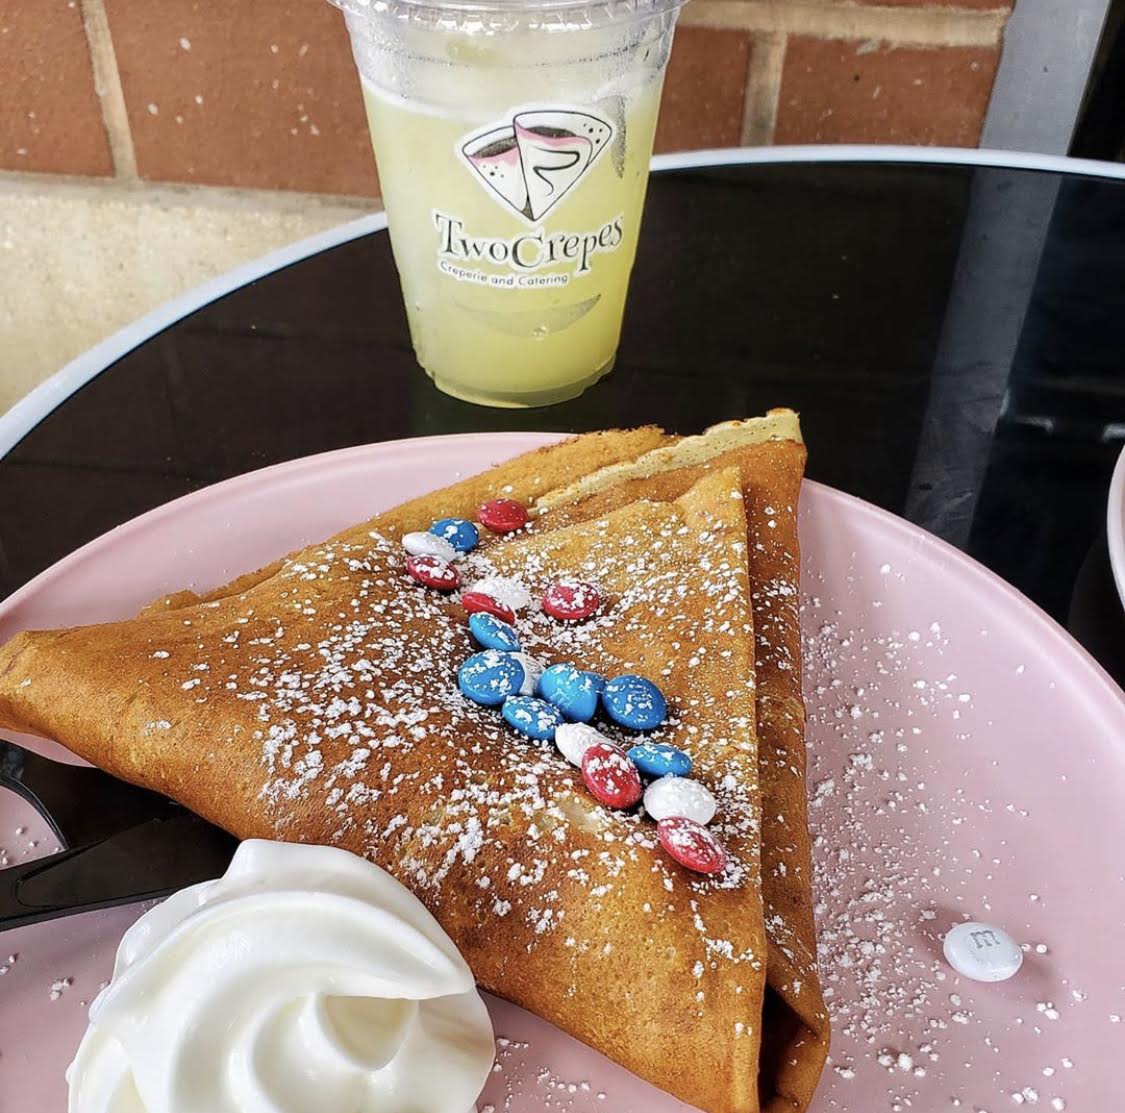 two crepes jersey city